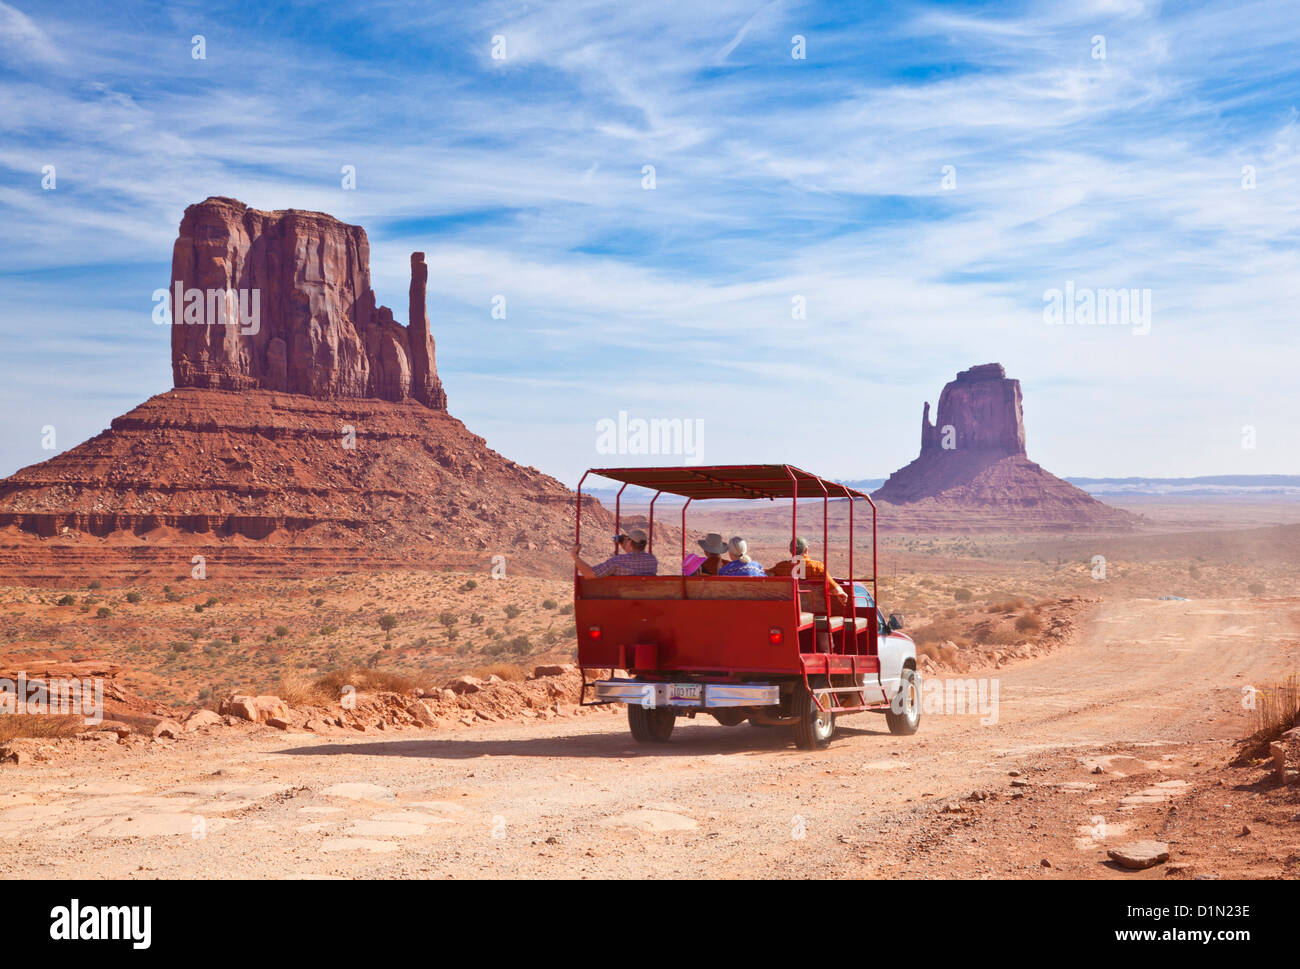 Tourists on a Jeep Tour around the Mittens and Buttes of Monument Valley Utah and Arizona USA United States of America Stock Photo